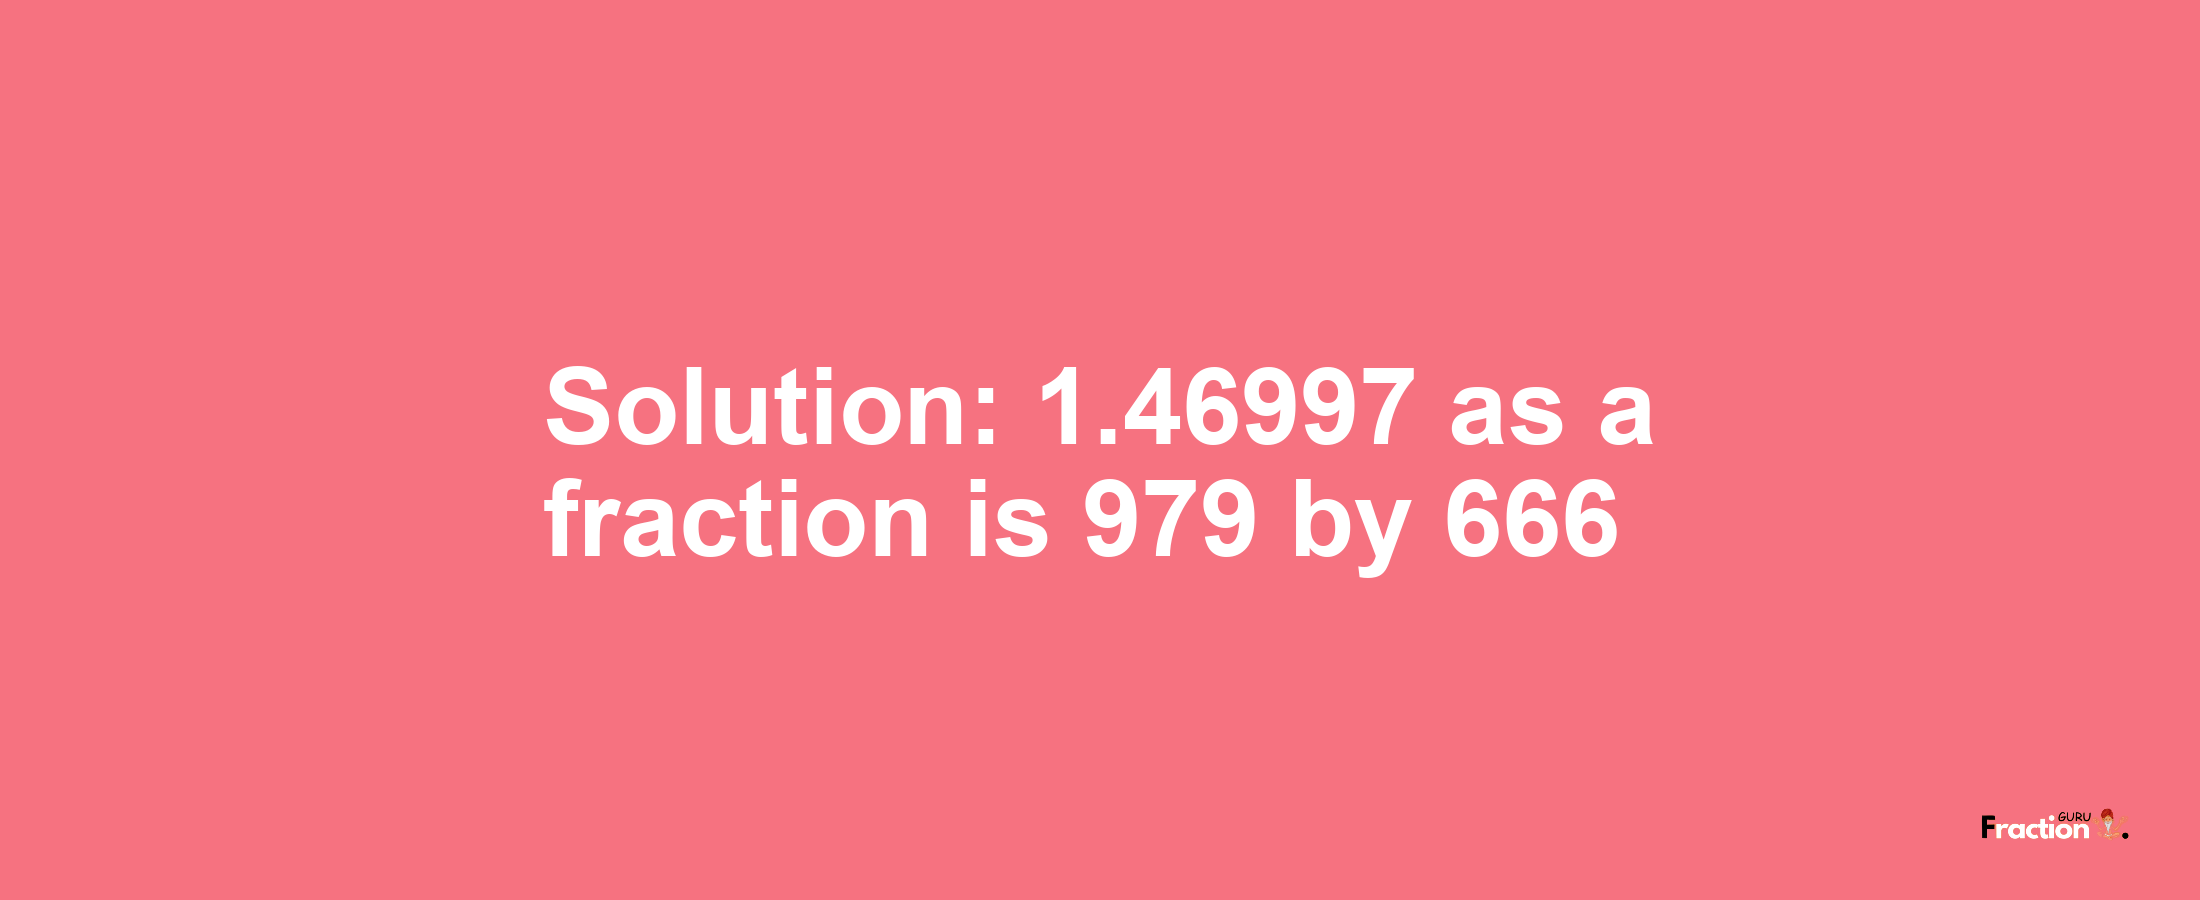 Solution:1.46997 as a fraction is 979/666